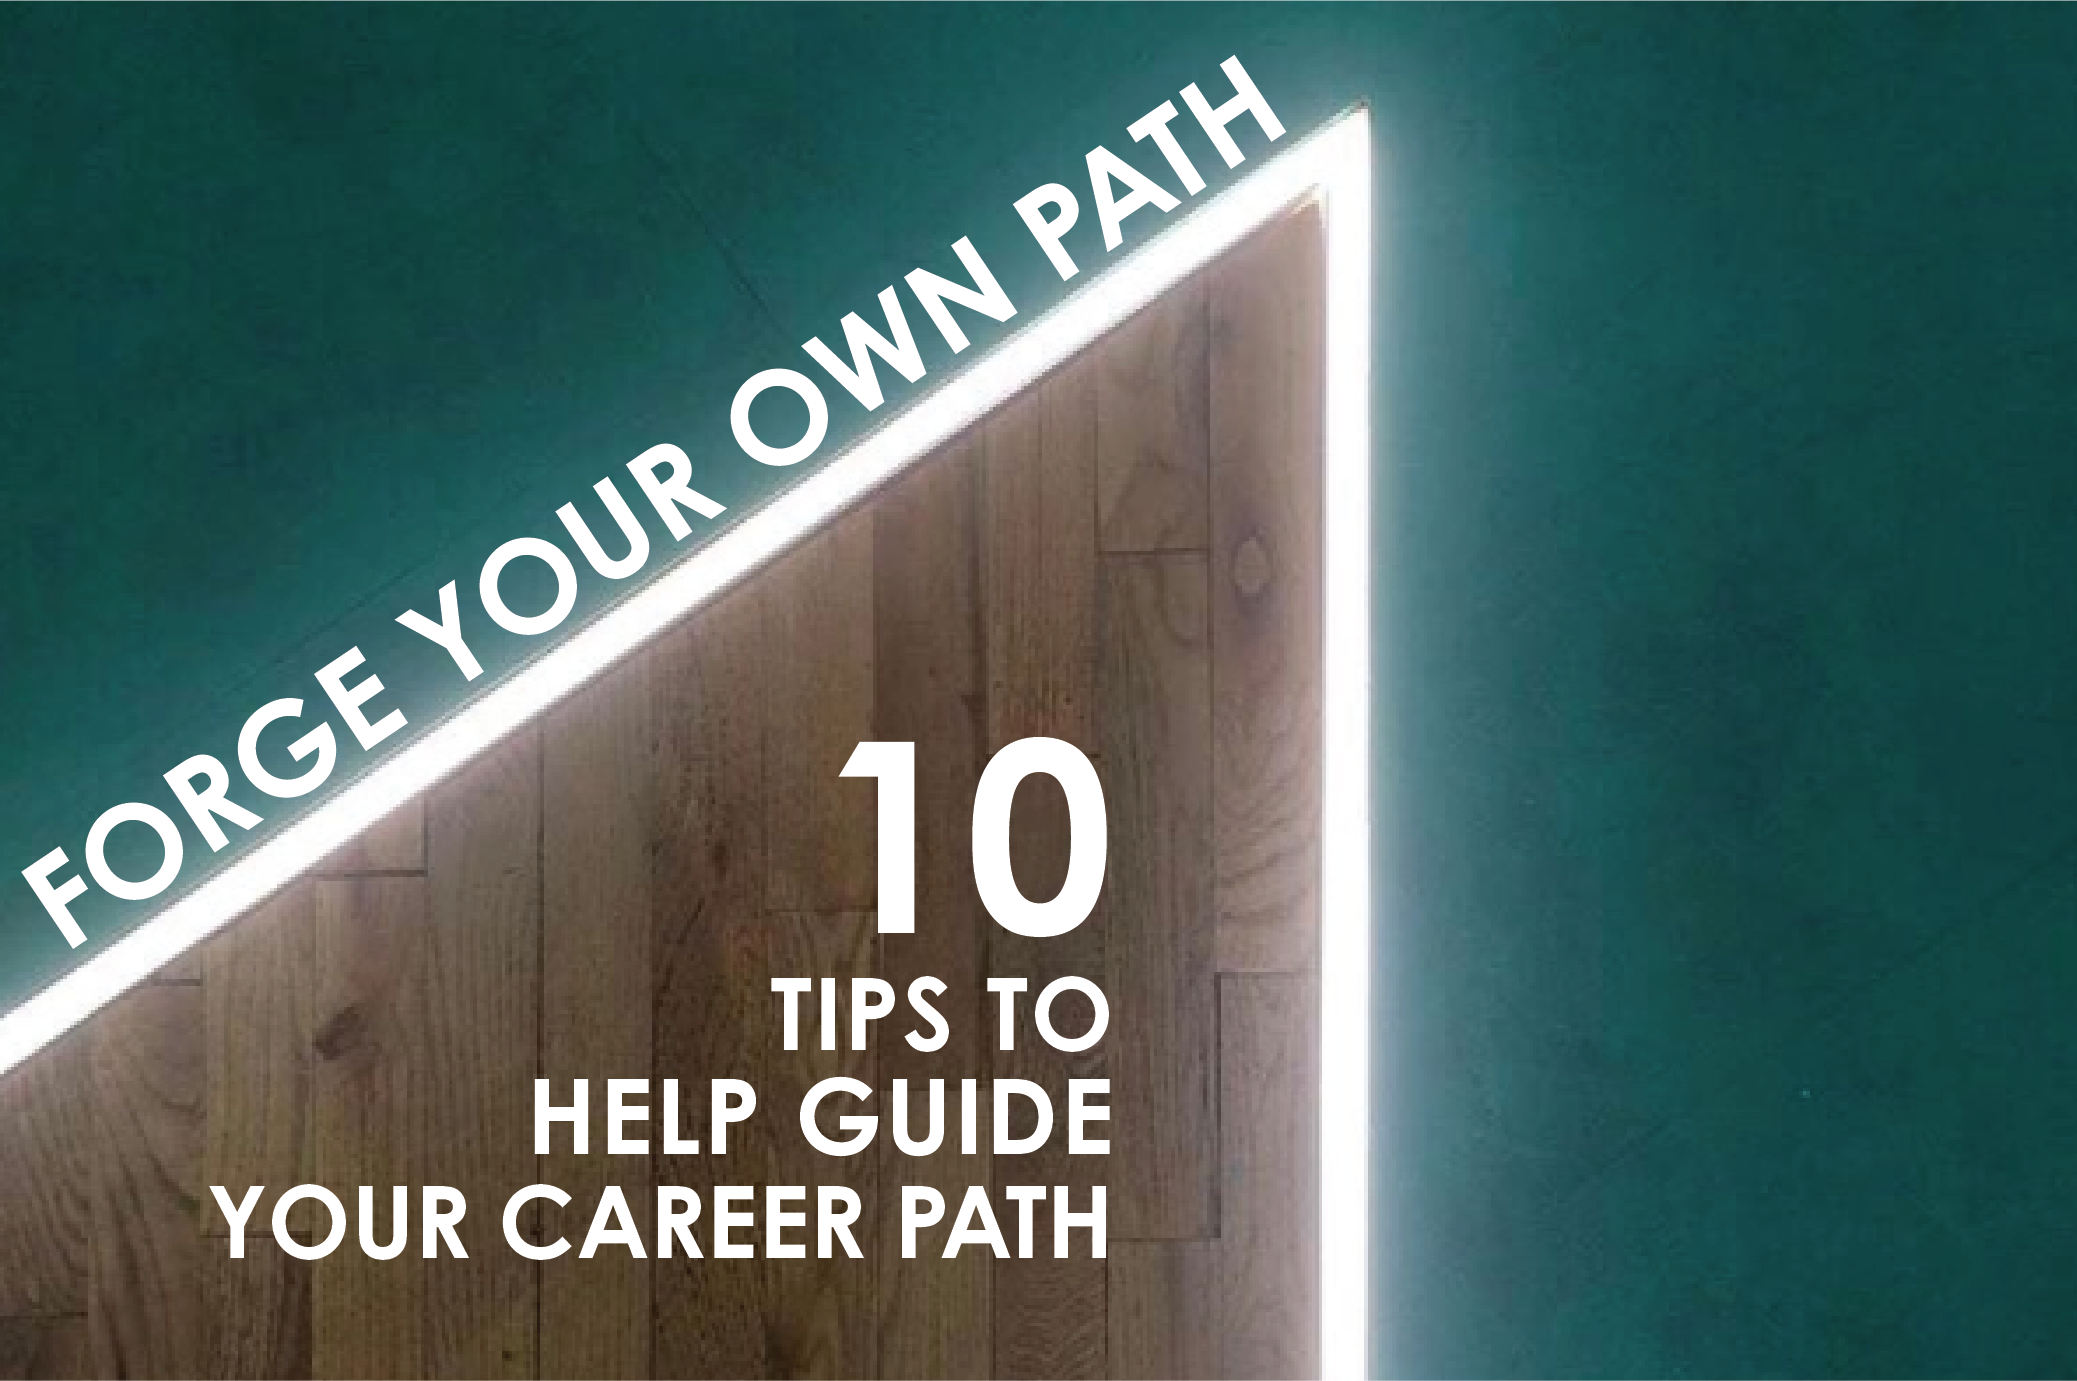 Graphic showing the idea of forging your own path